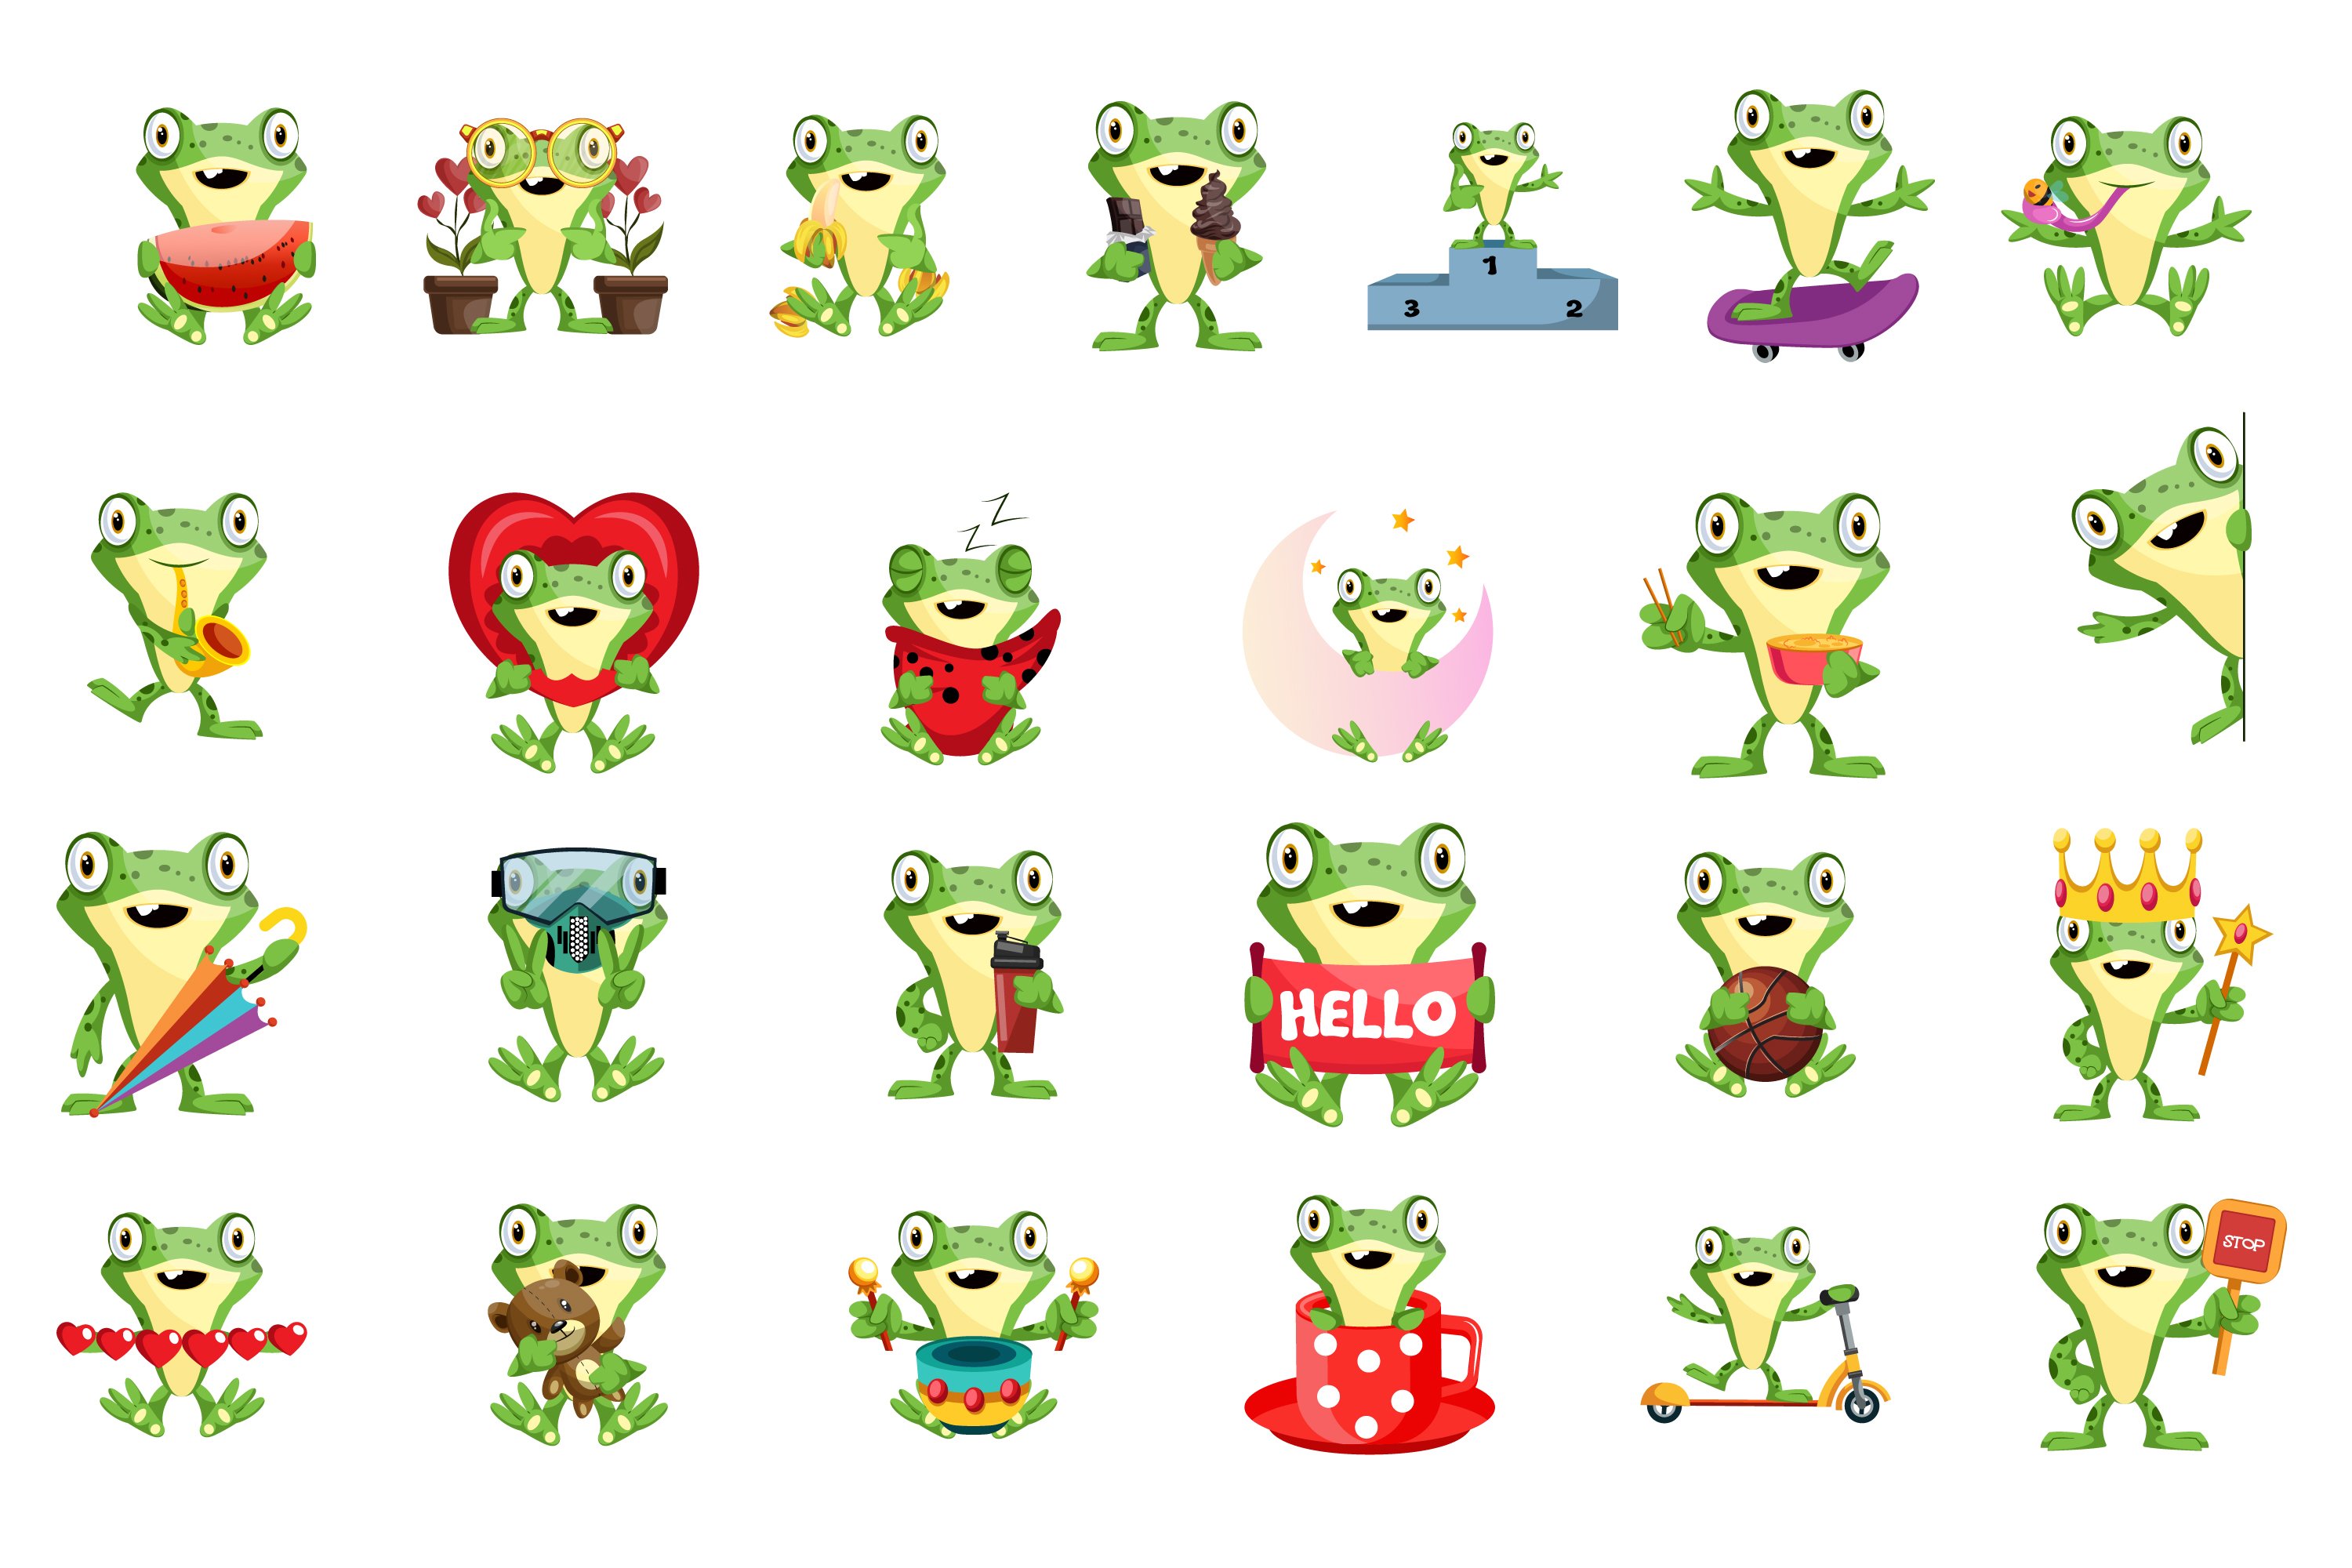 Frog is in love and has a happy mood.